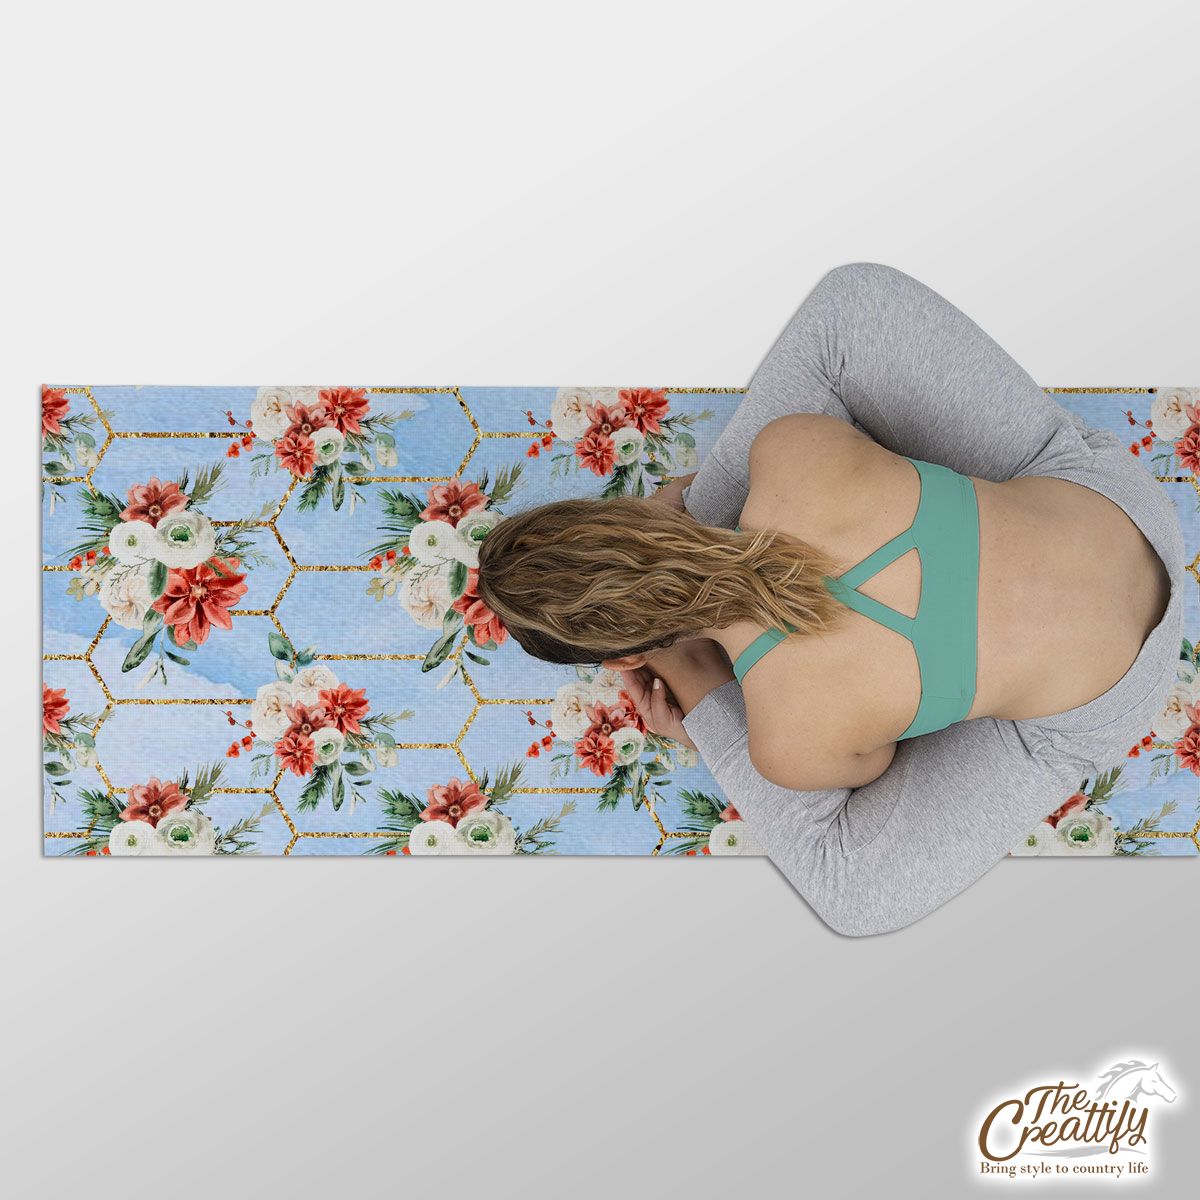 Rose Flower With Christmas Tree Branch And Mistletoe Seamless Pattern Yoga Mat